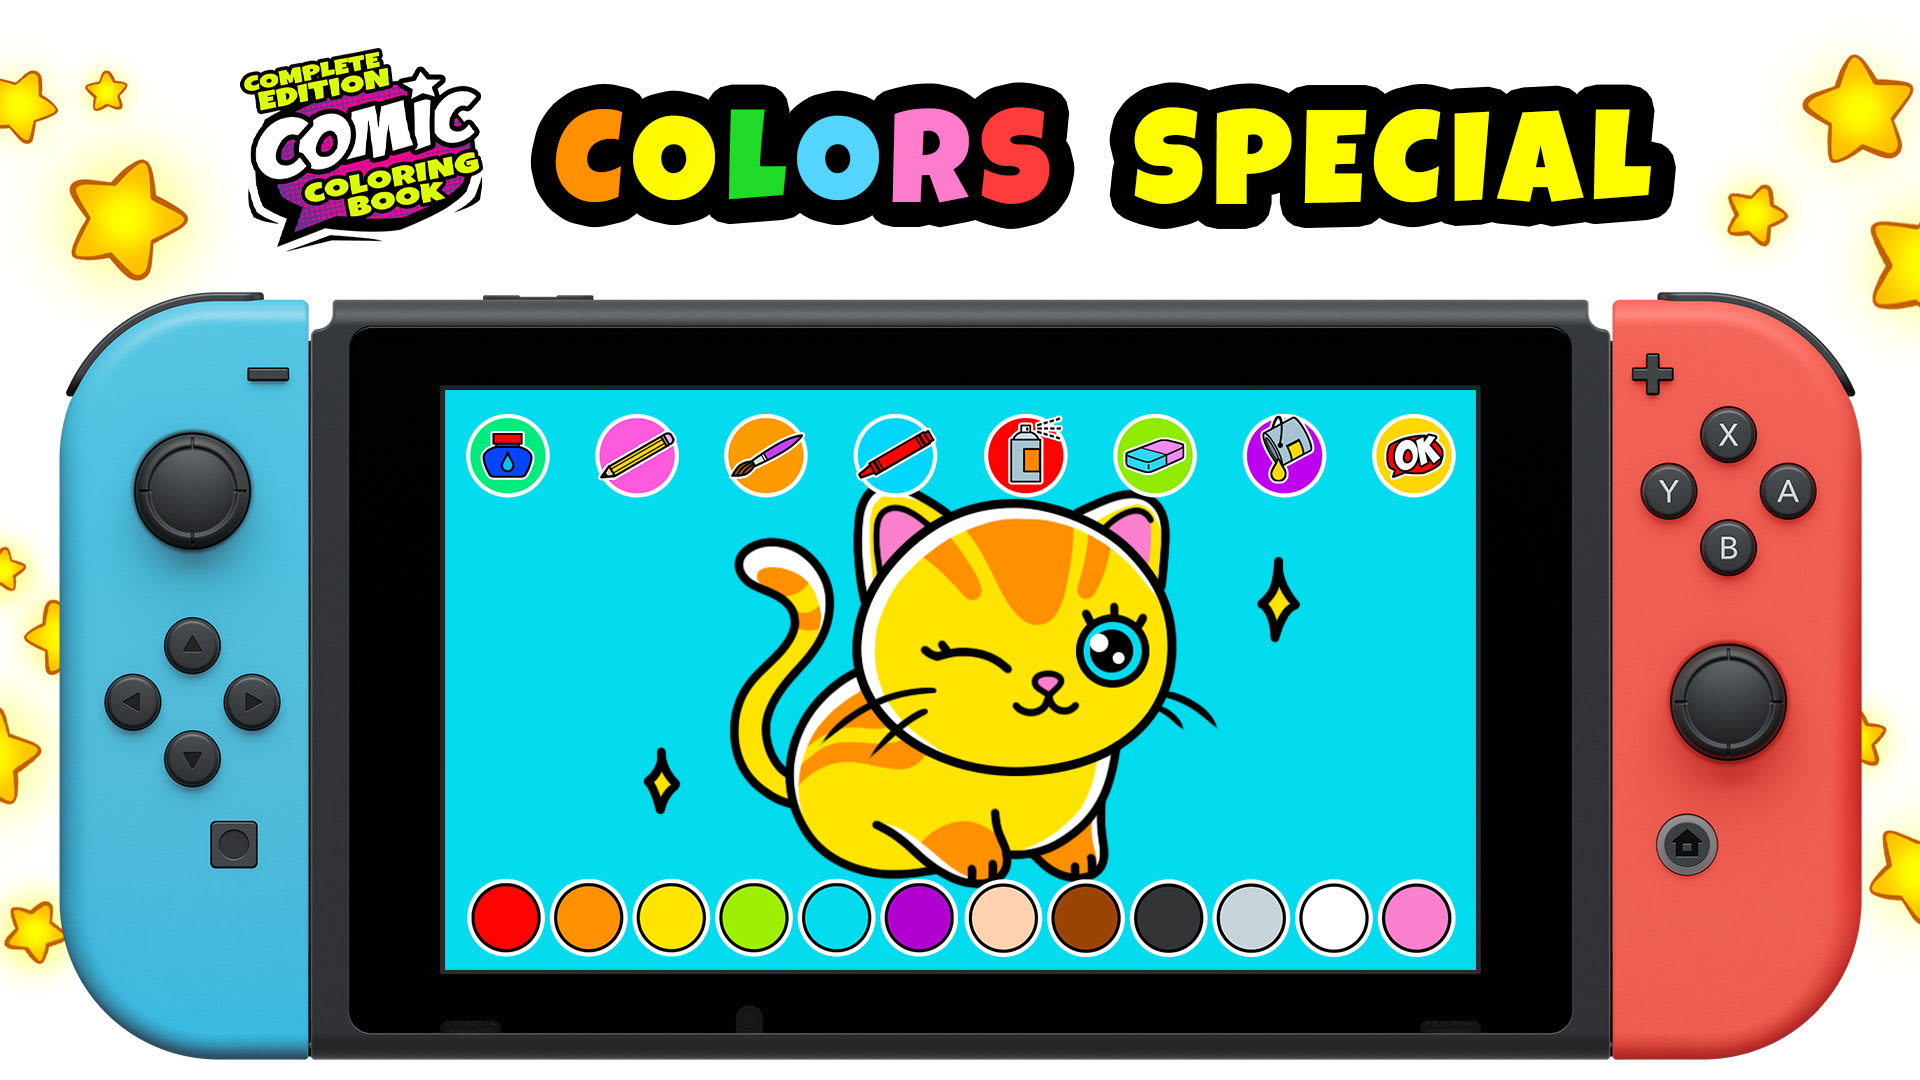 Comic Coloring Book Complete Edition: COLORS Special